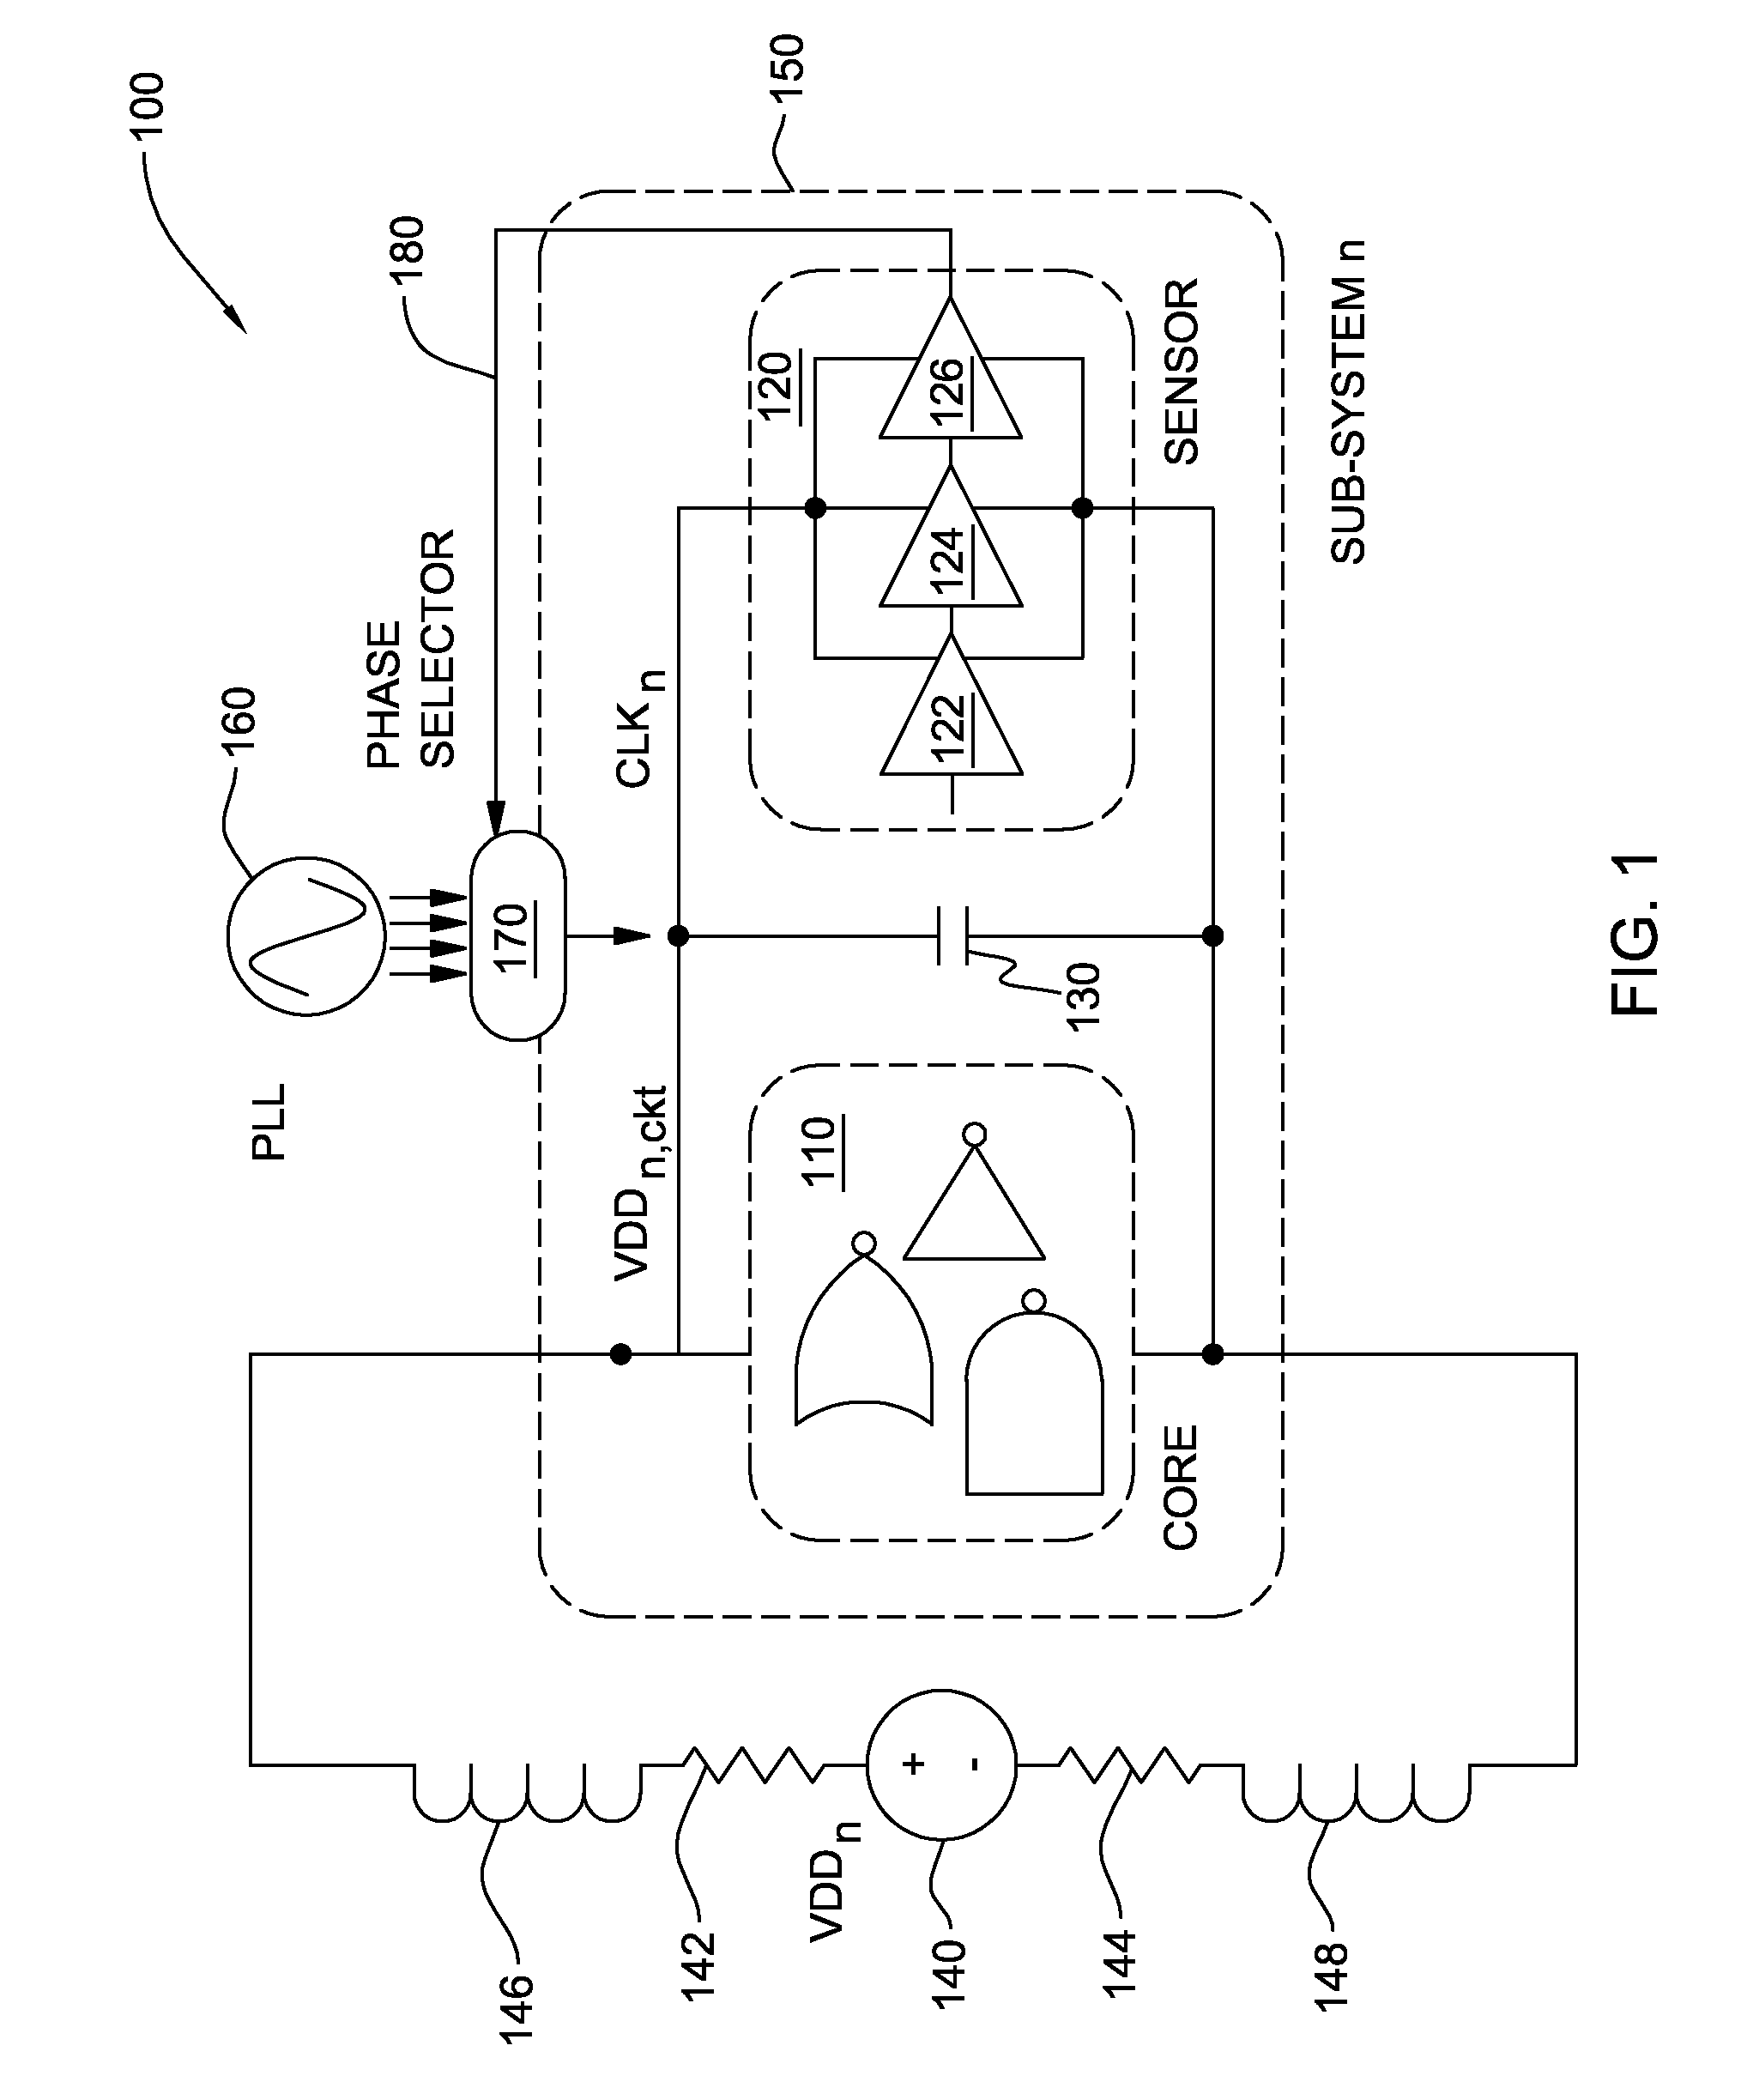 Apparatus and method for micro performance tuning of a clocked digital system